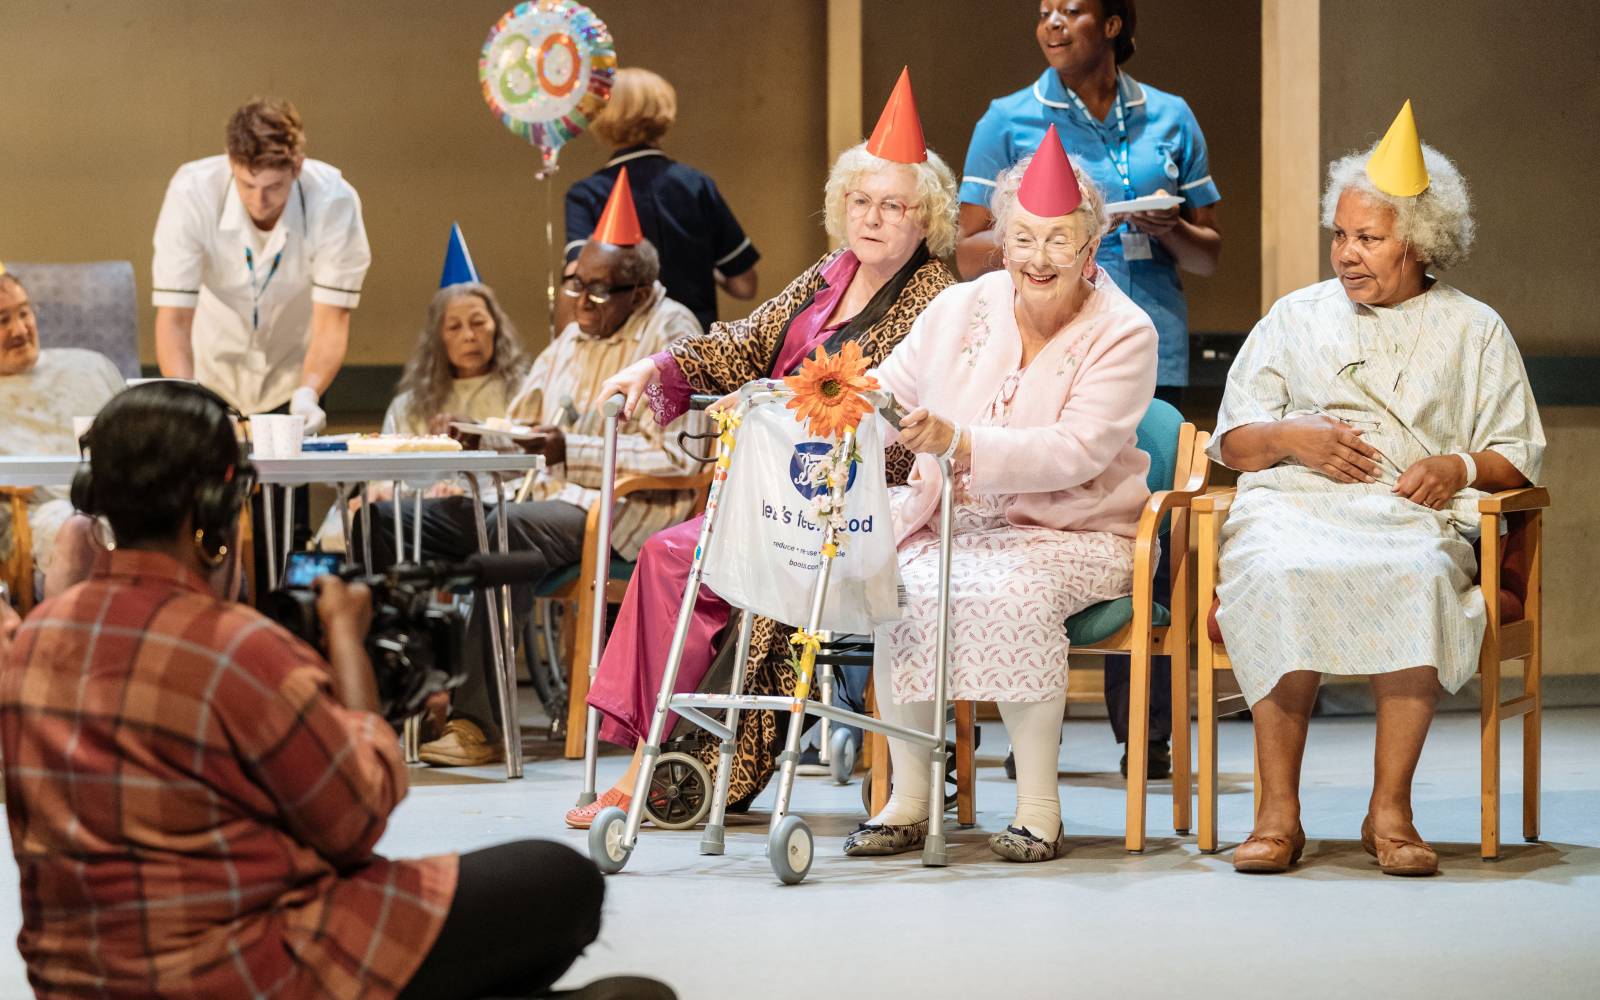 Elderly patients sit on chairs in a hospital. They are wearing paper party hats. Medical staff attend to them. In the foreground, with her back to the camera, a camerawoman films the scene